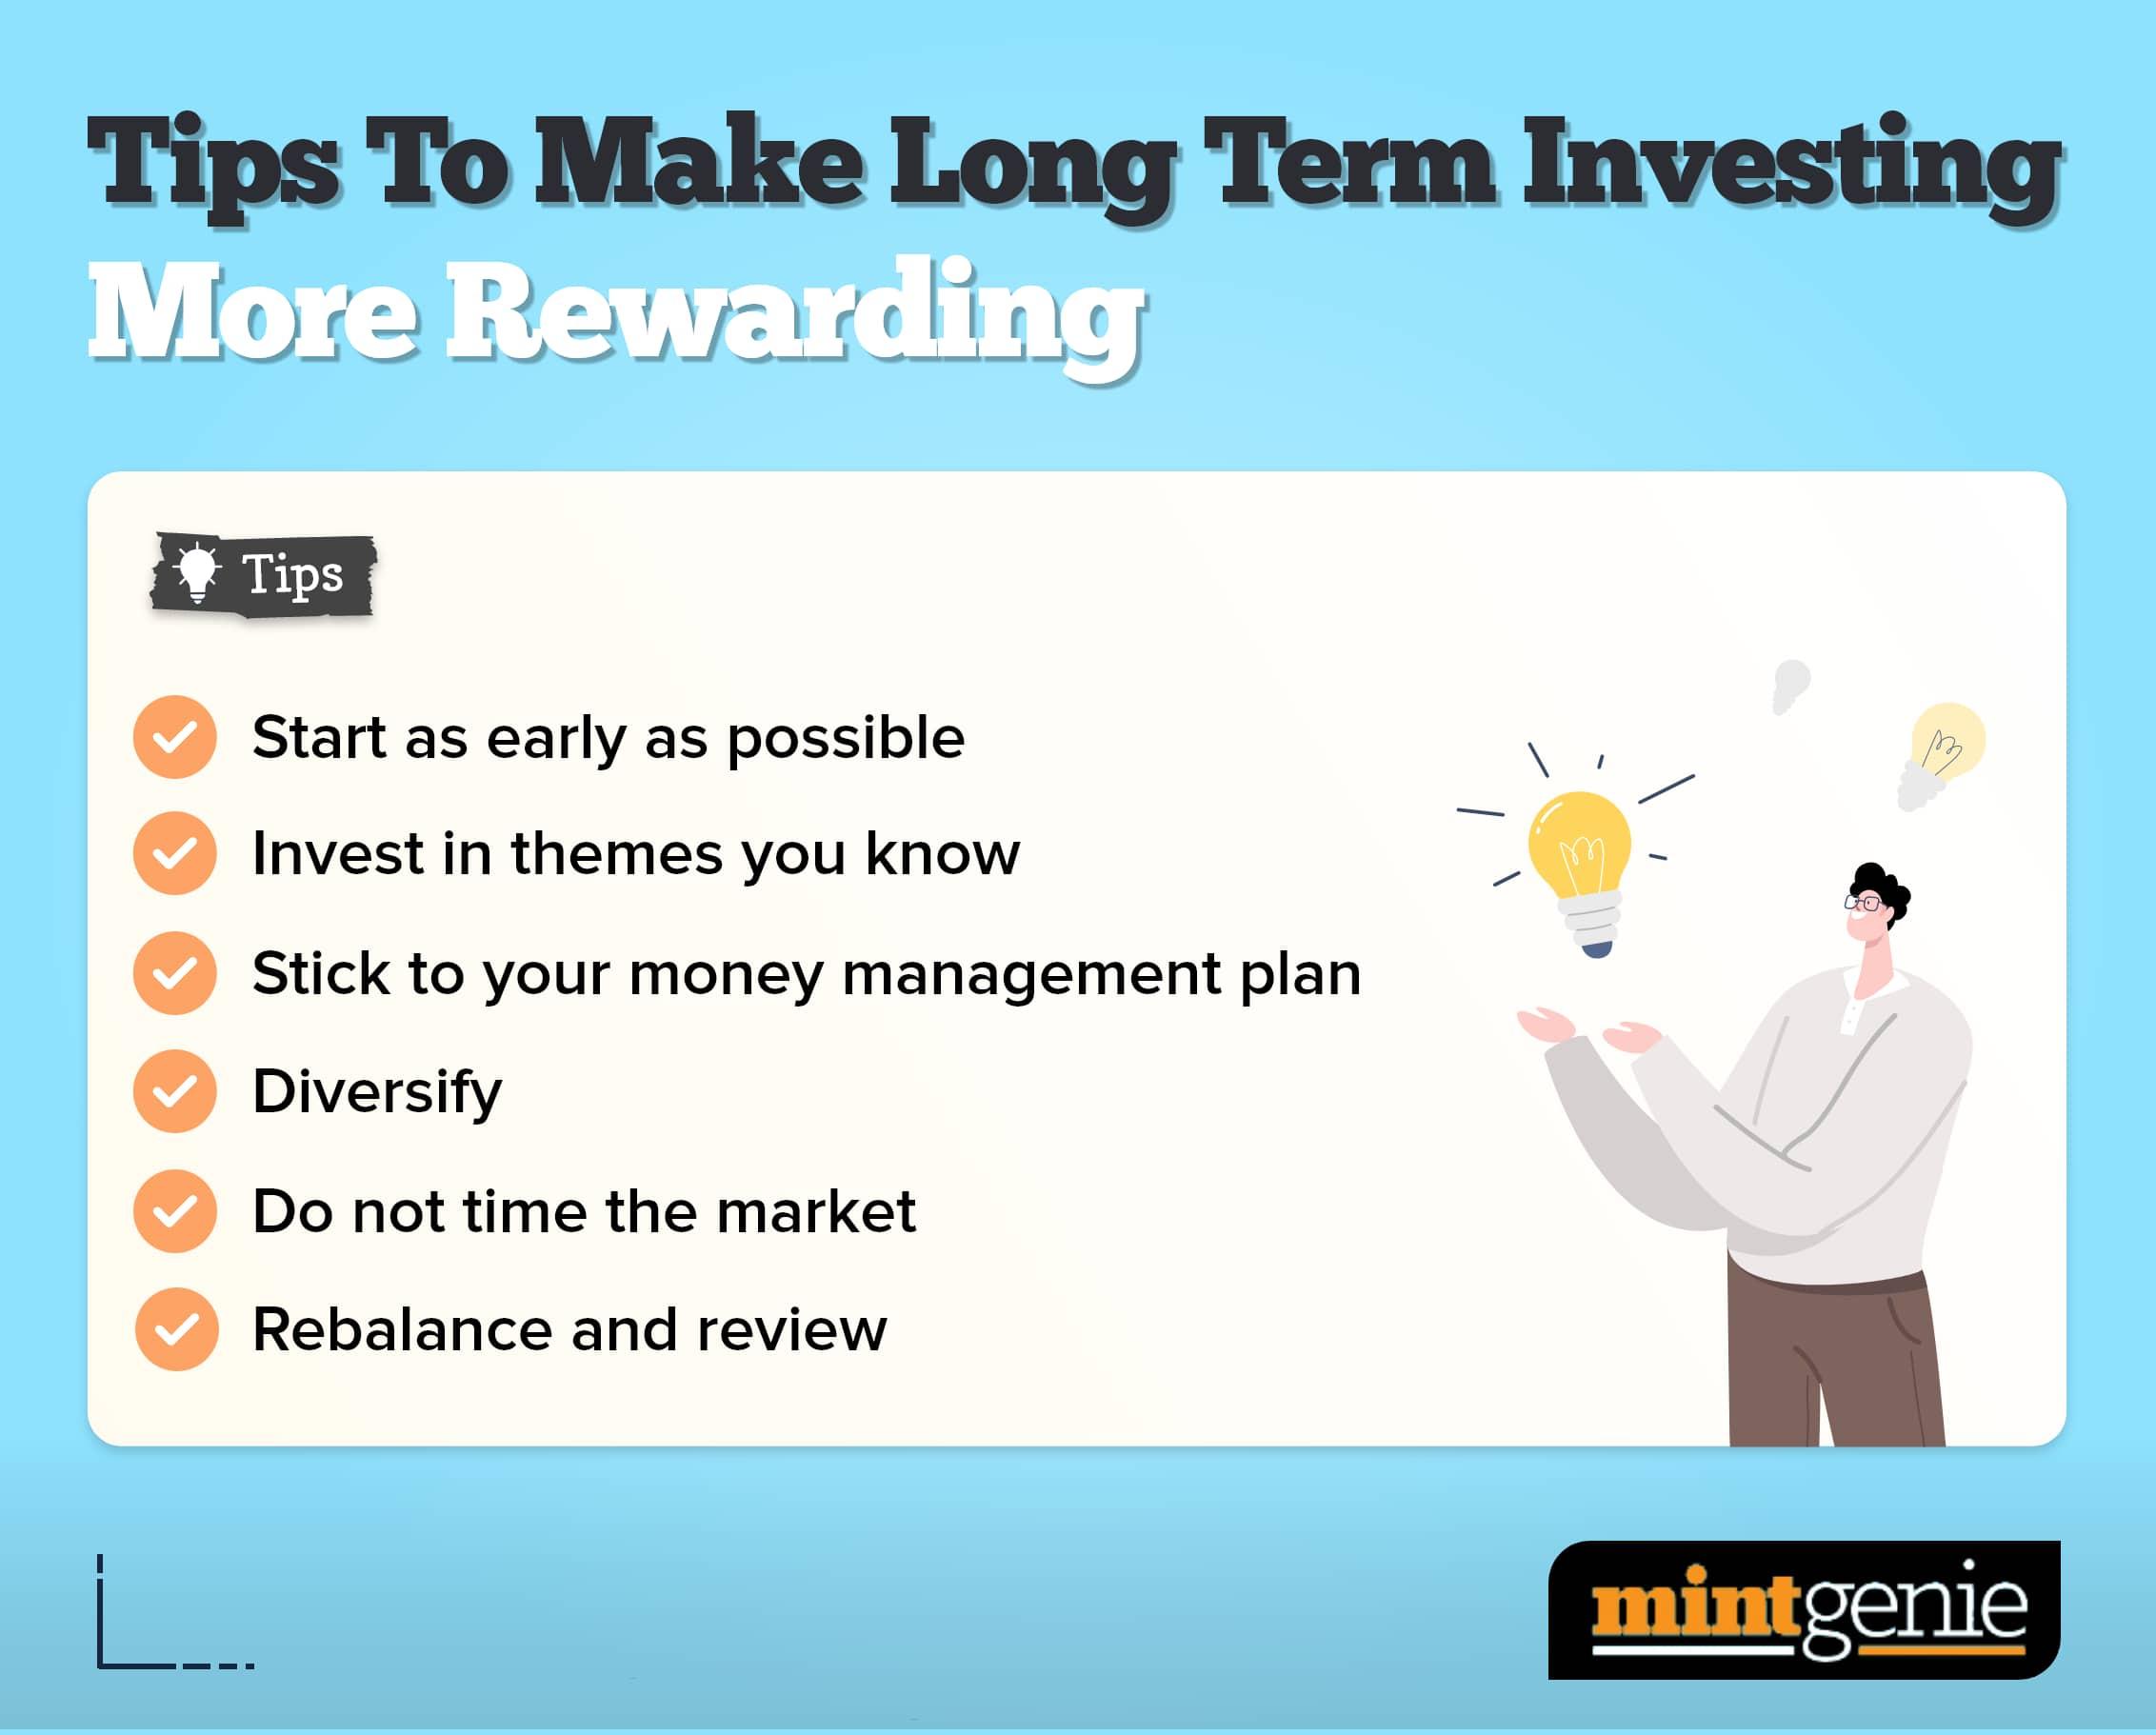 How to make long-term investment more rewarding